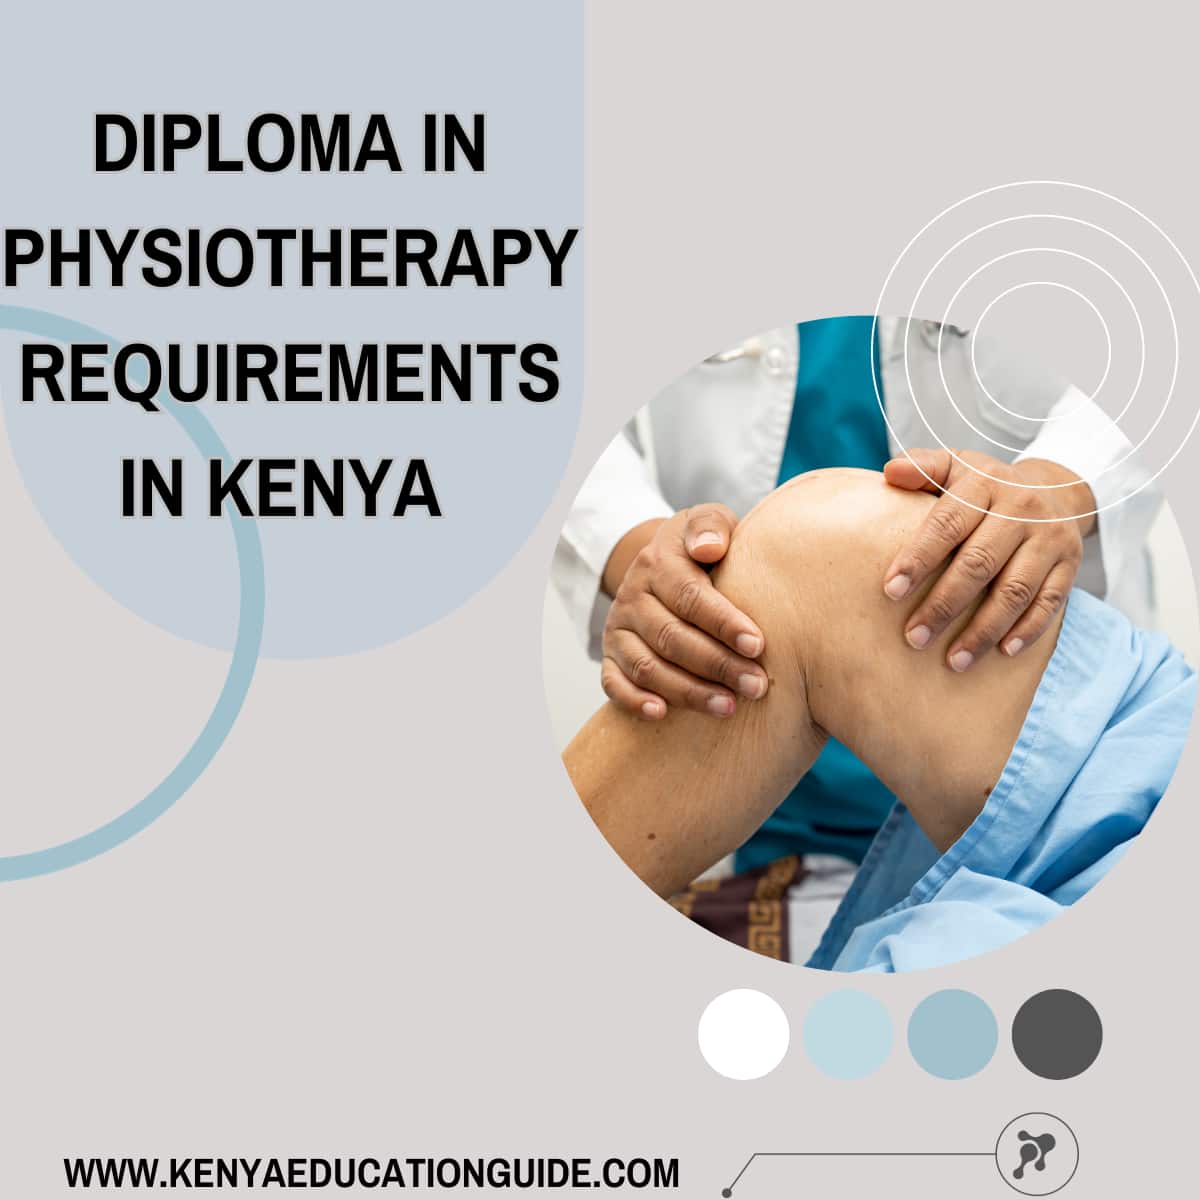 Diploma in Physiotherapy Requirements